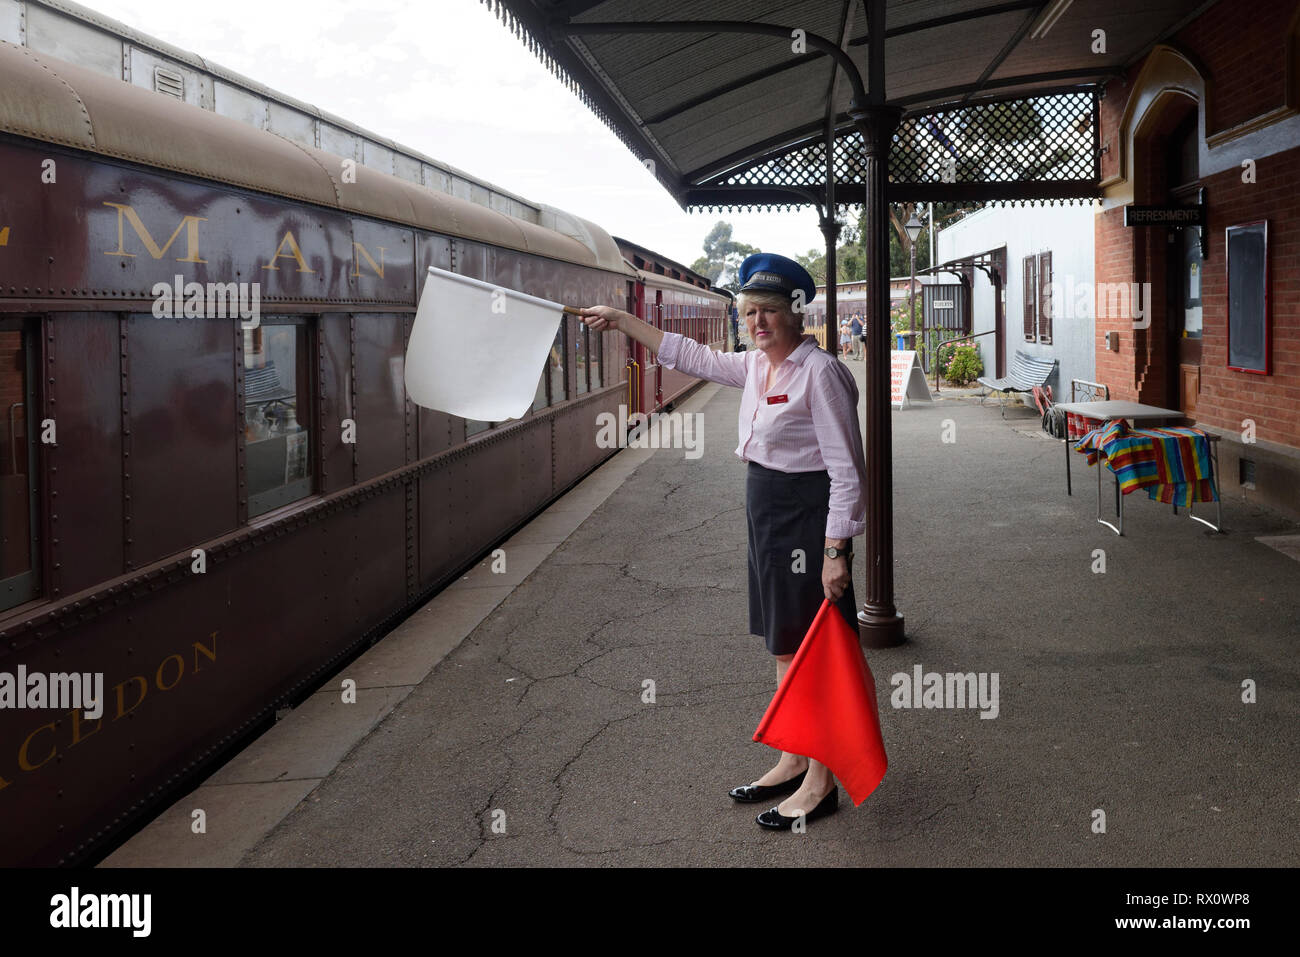 Station master with flags, railway station platform, Maldon, Victoria, Australia. Opened in 1884, the historic station served a vital role in supporti Stock Photo